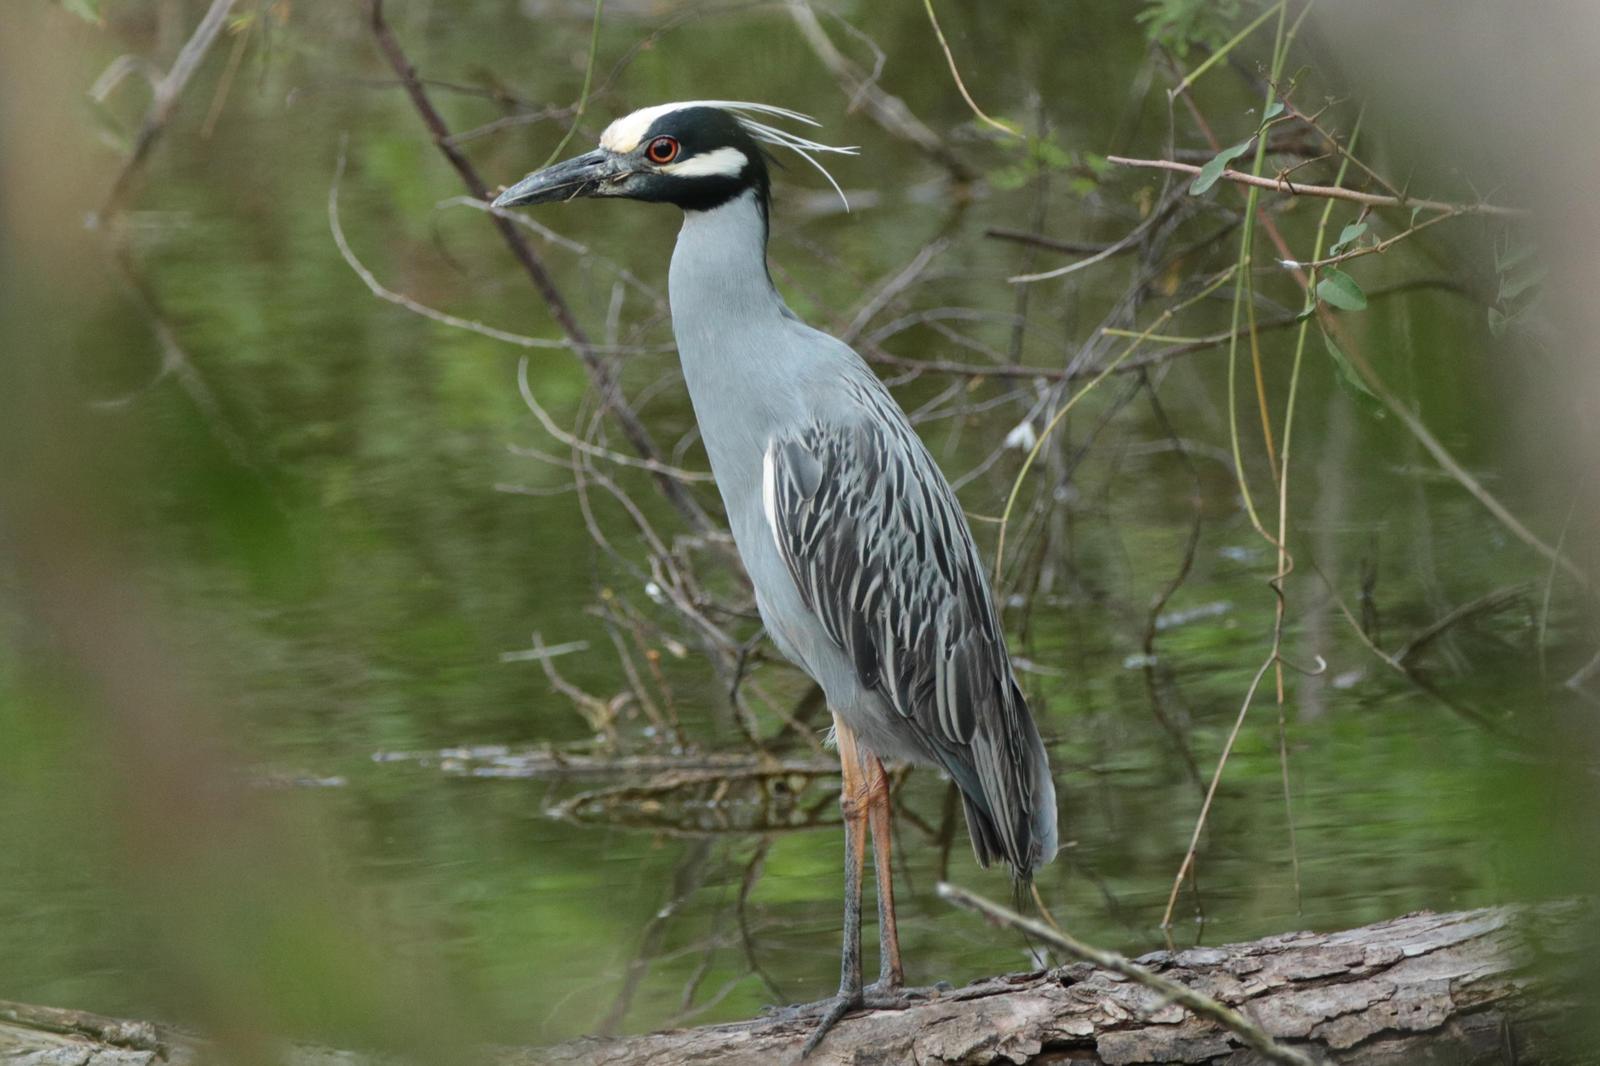 Yellow-crowned Night-Heron Photo by Kristy Baker